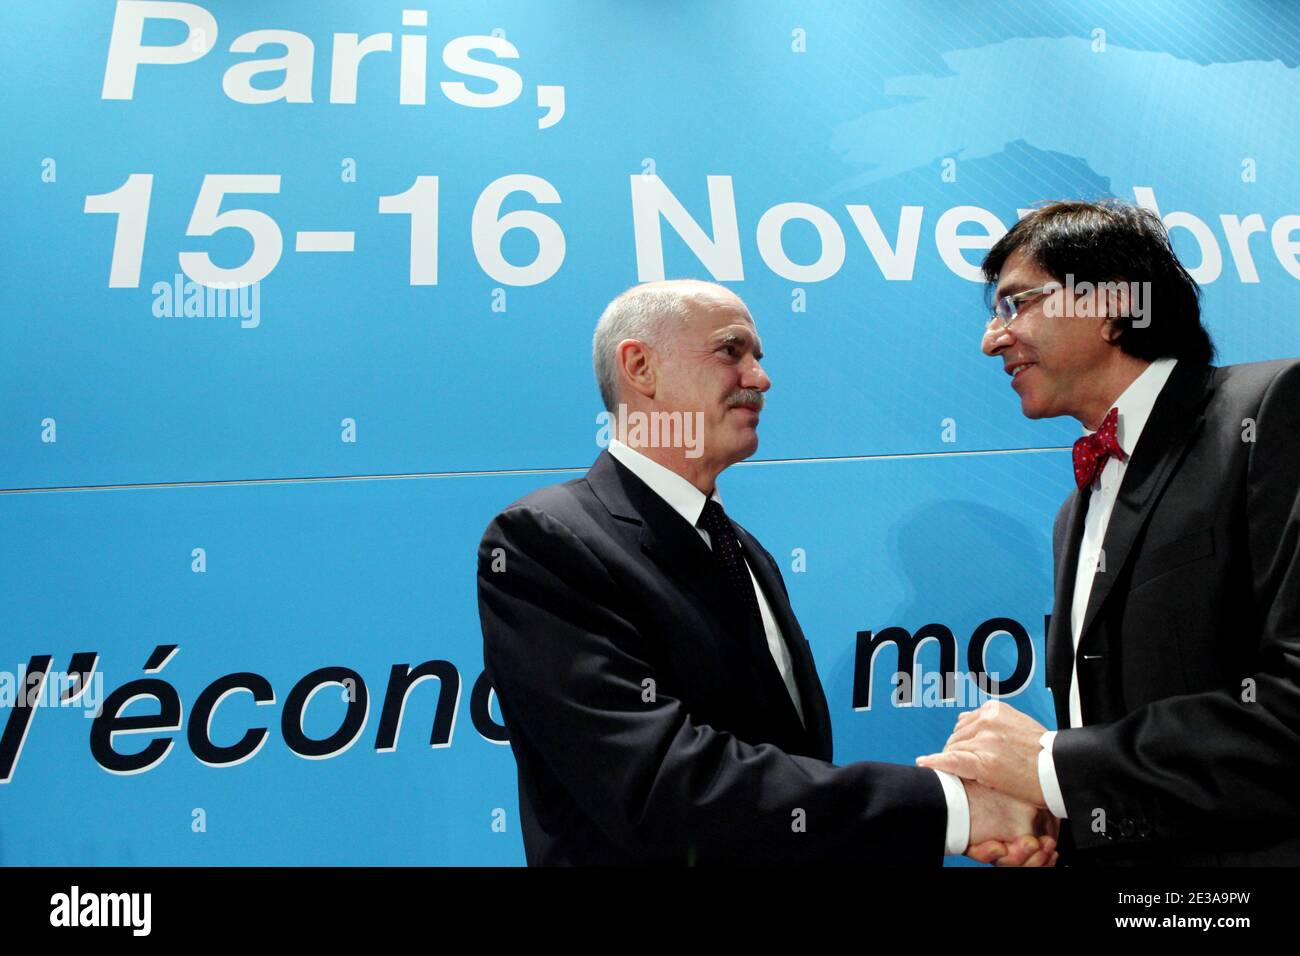 Greece's Prime Minister George Papandreou shakes to President of Belgium Socialist Party, Elio Di Rupo before a council meeting of the Socialist International in Paris, France, on November 15, 2010. Photo by Stephane Lemouton/ABACAPRESS.COM Stock Photo